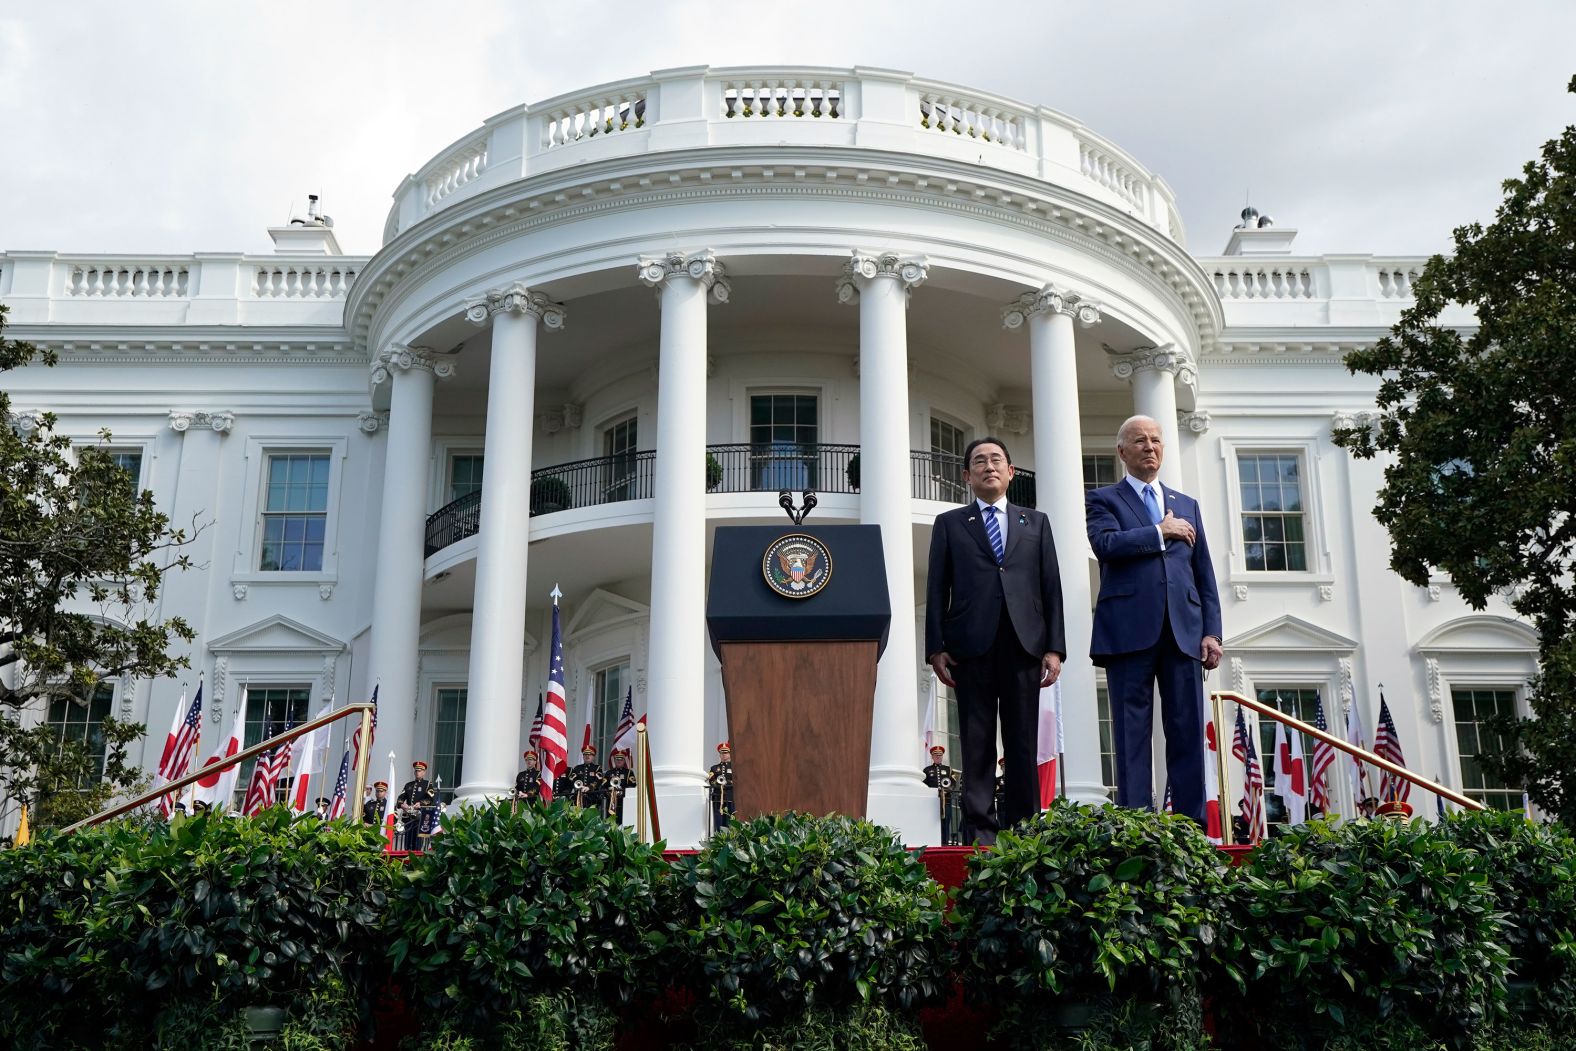 President Joe Biden and Japanese Prime Minister Fumio Kishida listen to the National Anthem during a ceremony on the South Lawn of the White House in Washington, DC, on Wednesday, April 10. <a href="index.php?page=&url=https%3A%2F%2Fwww.cnn.com%2F2024%2F04%2F10%2Fpolitics%2Fbiden-kishida-state-visit%2Findex.html" target="_blank">Biden heralded the "monumental alliance between our two great democracies"</a> at an official arrival ceremony for Kishida, who was making a state visit to the United States.